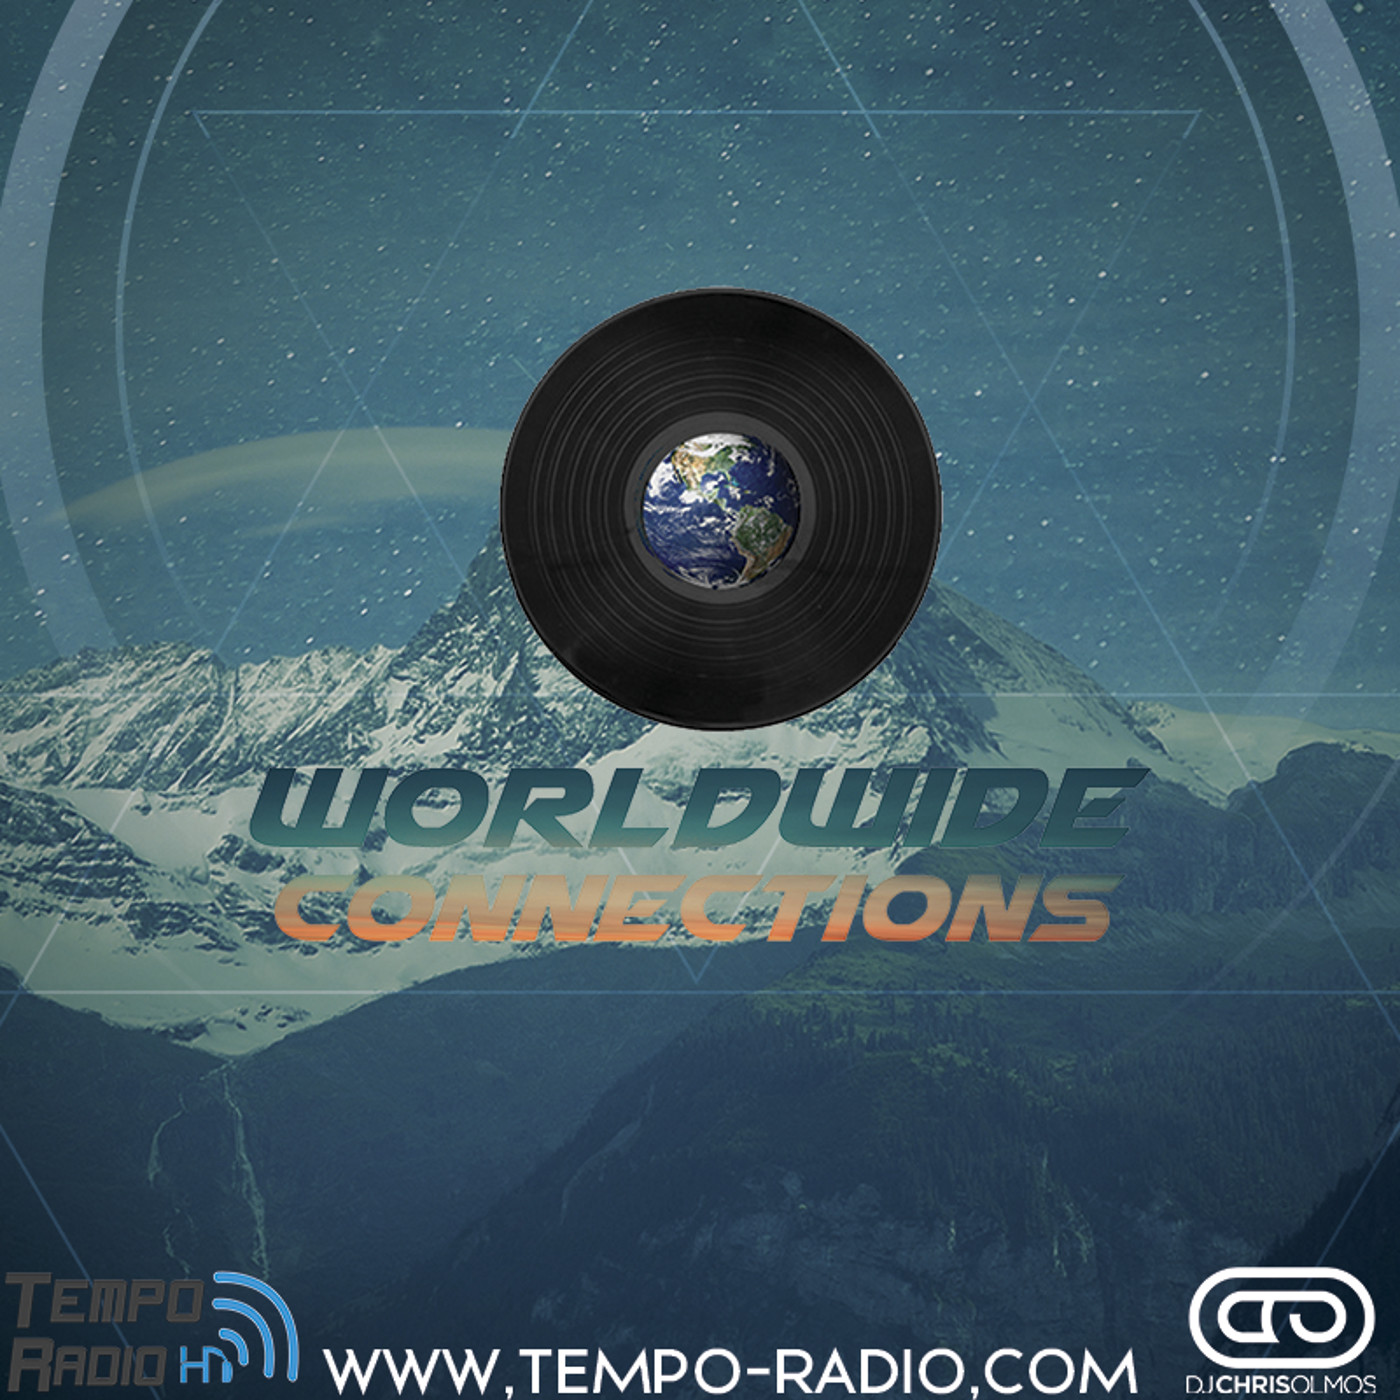 Worldwide Connections 009 (Han Beukers Guest Mix)